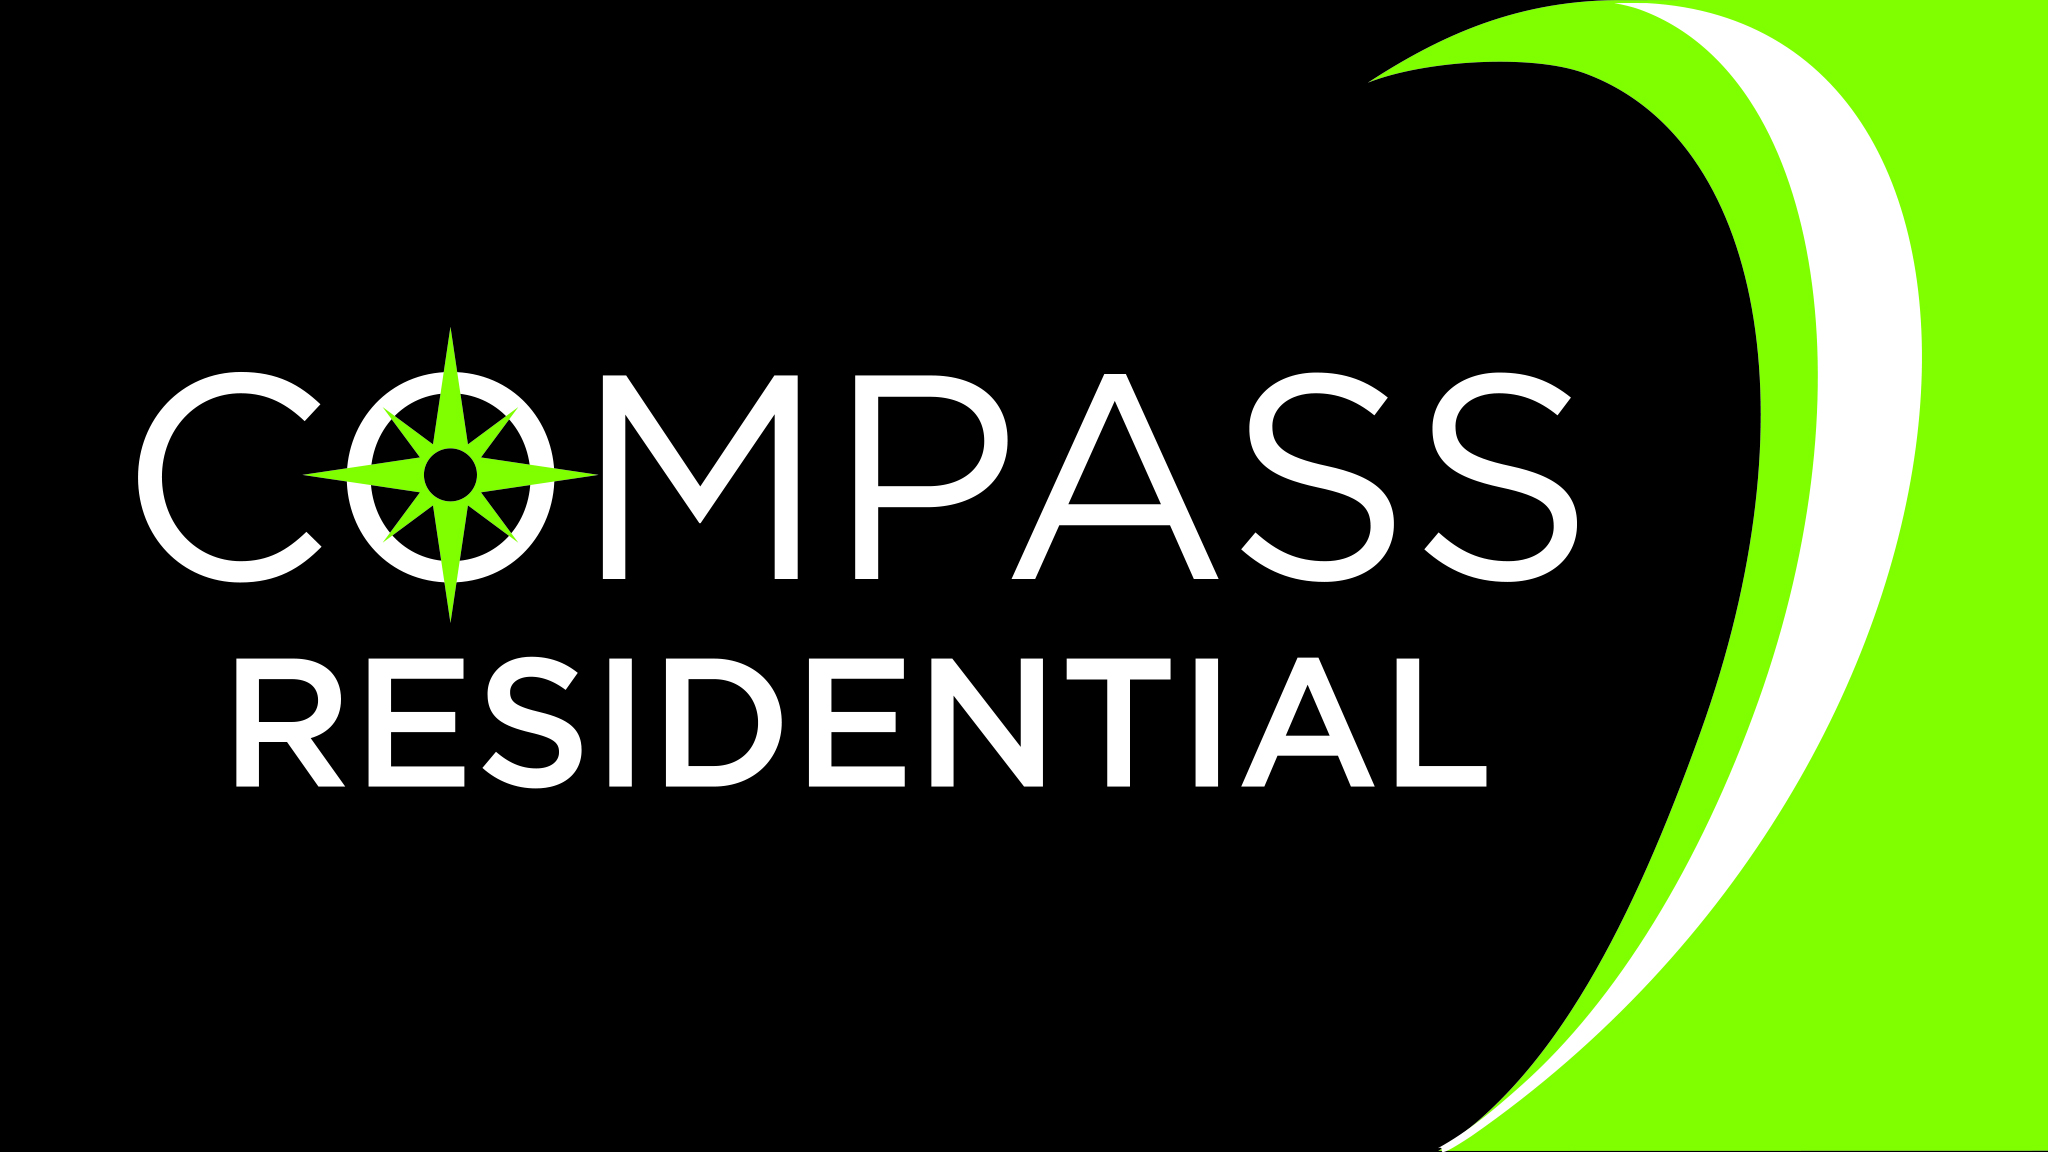 Compass Residential Limited